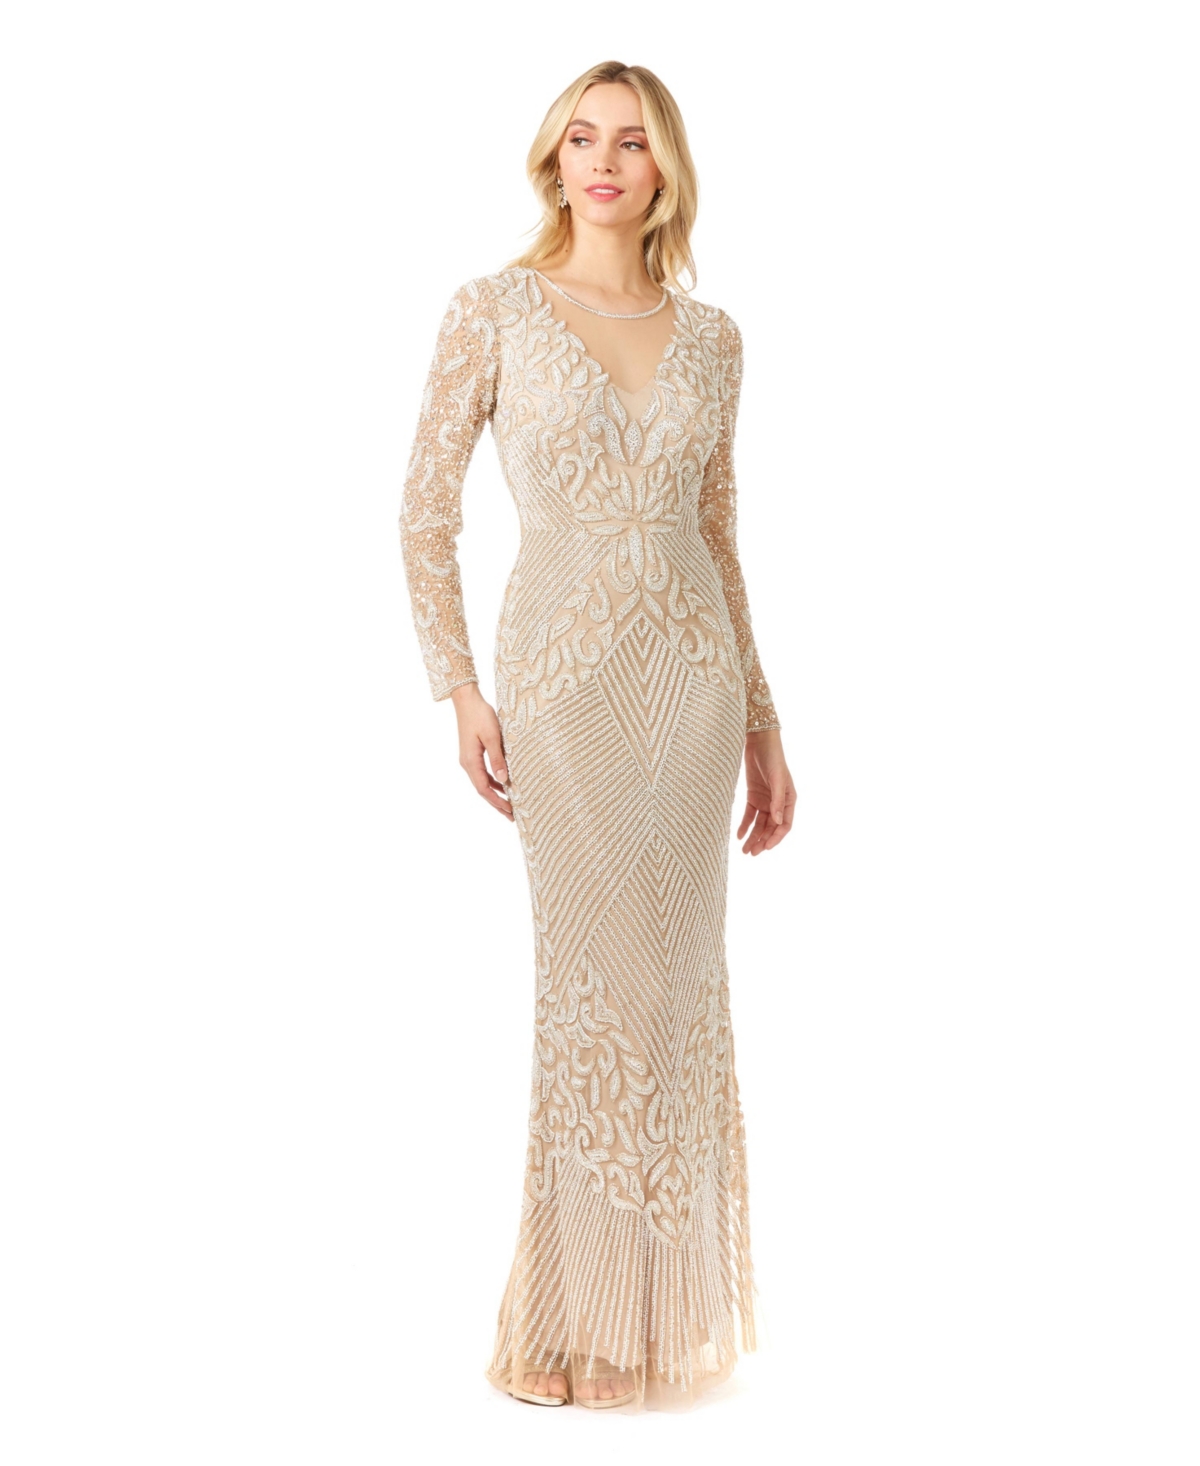 Women's - Fitted Long Sleeve Beaded Gown - Ivory/nude